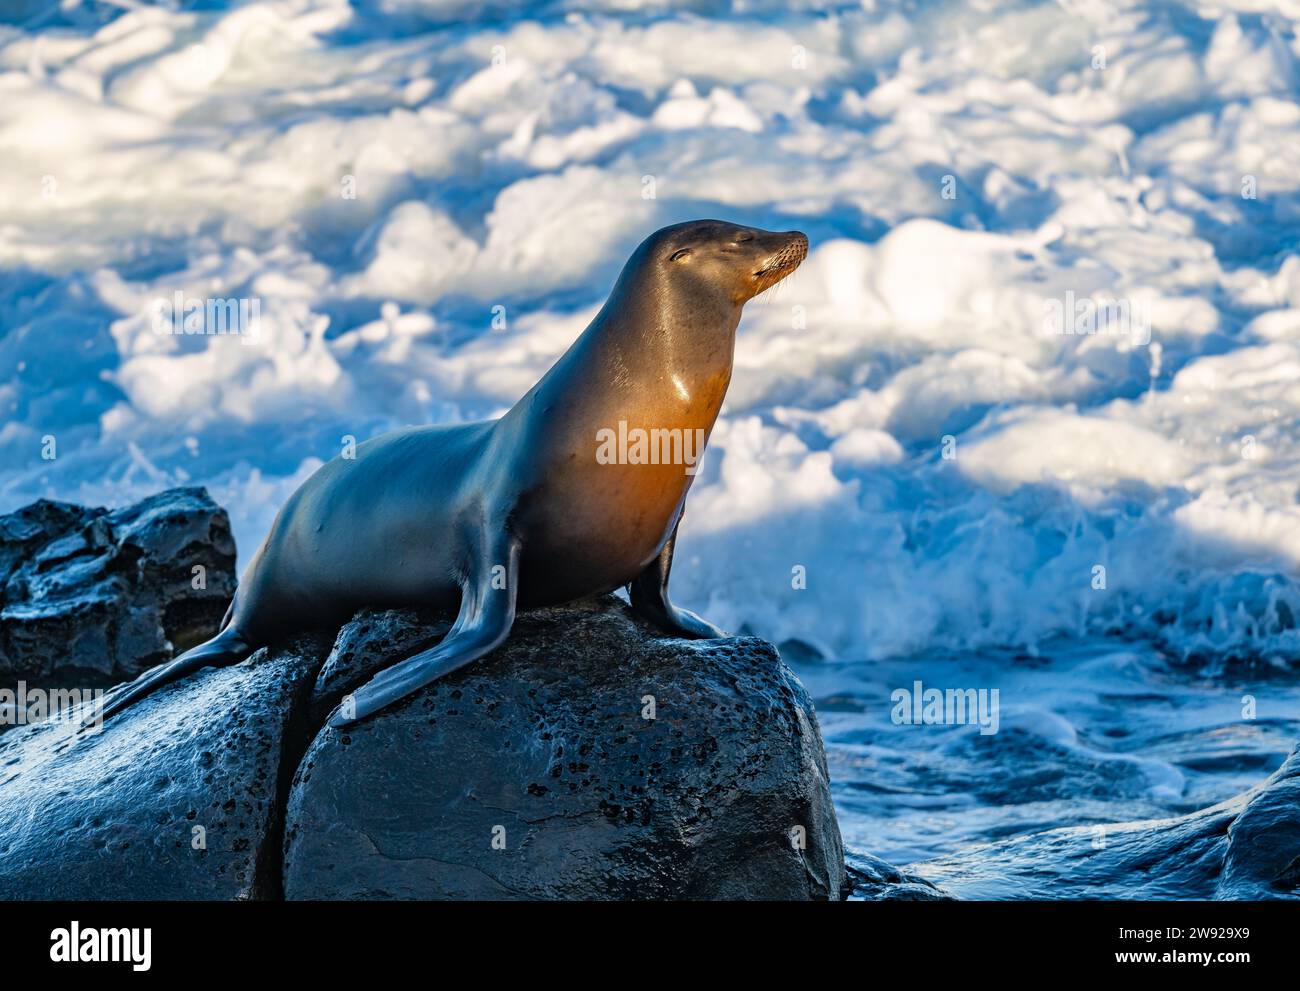 A zenned out California sea lion (Zalophus californianus) sits on a rock against crushing waves on the coast of Southern California, USA. Stock Photo